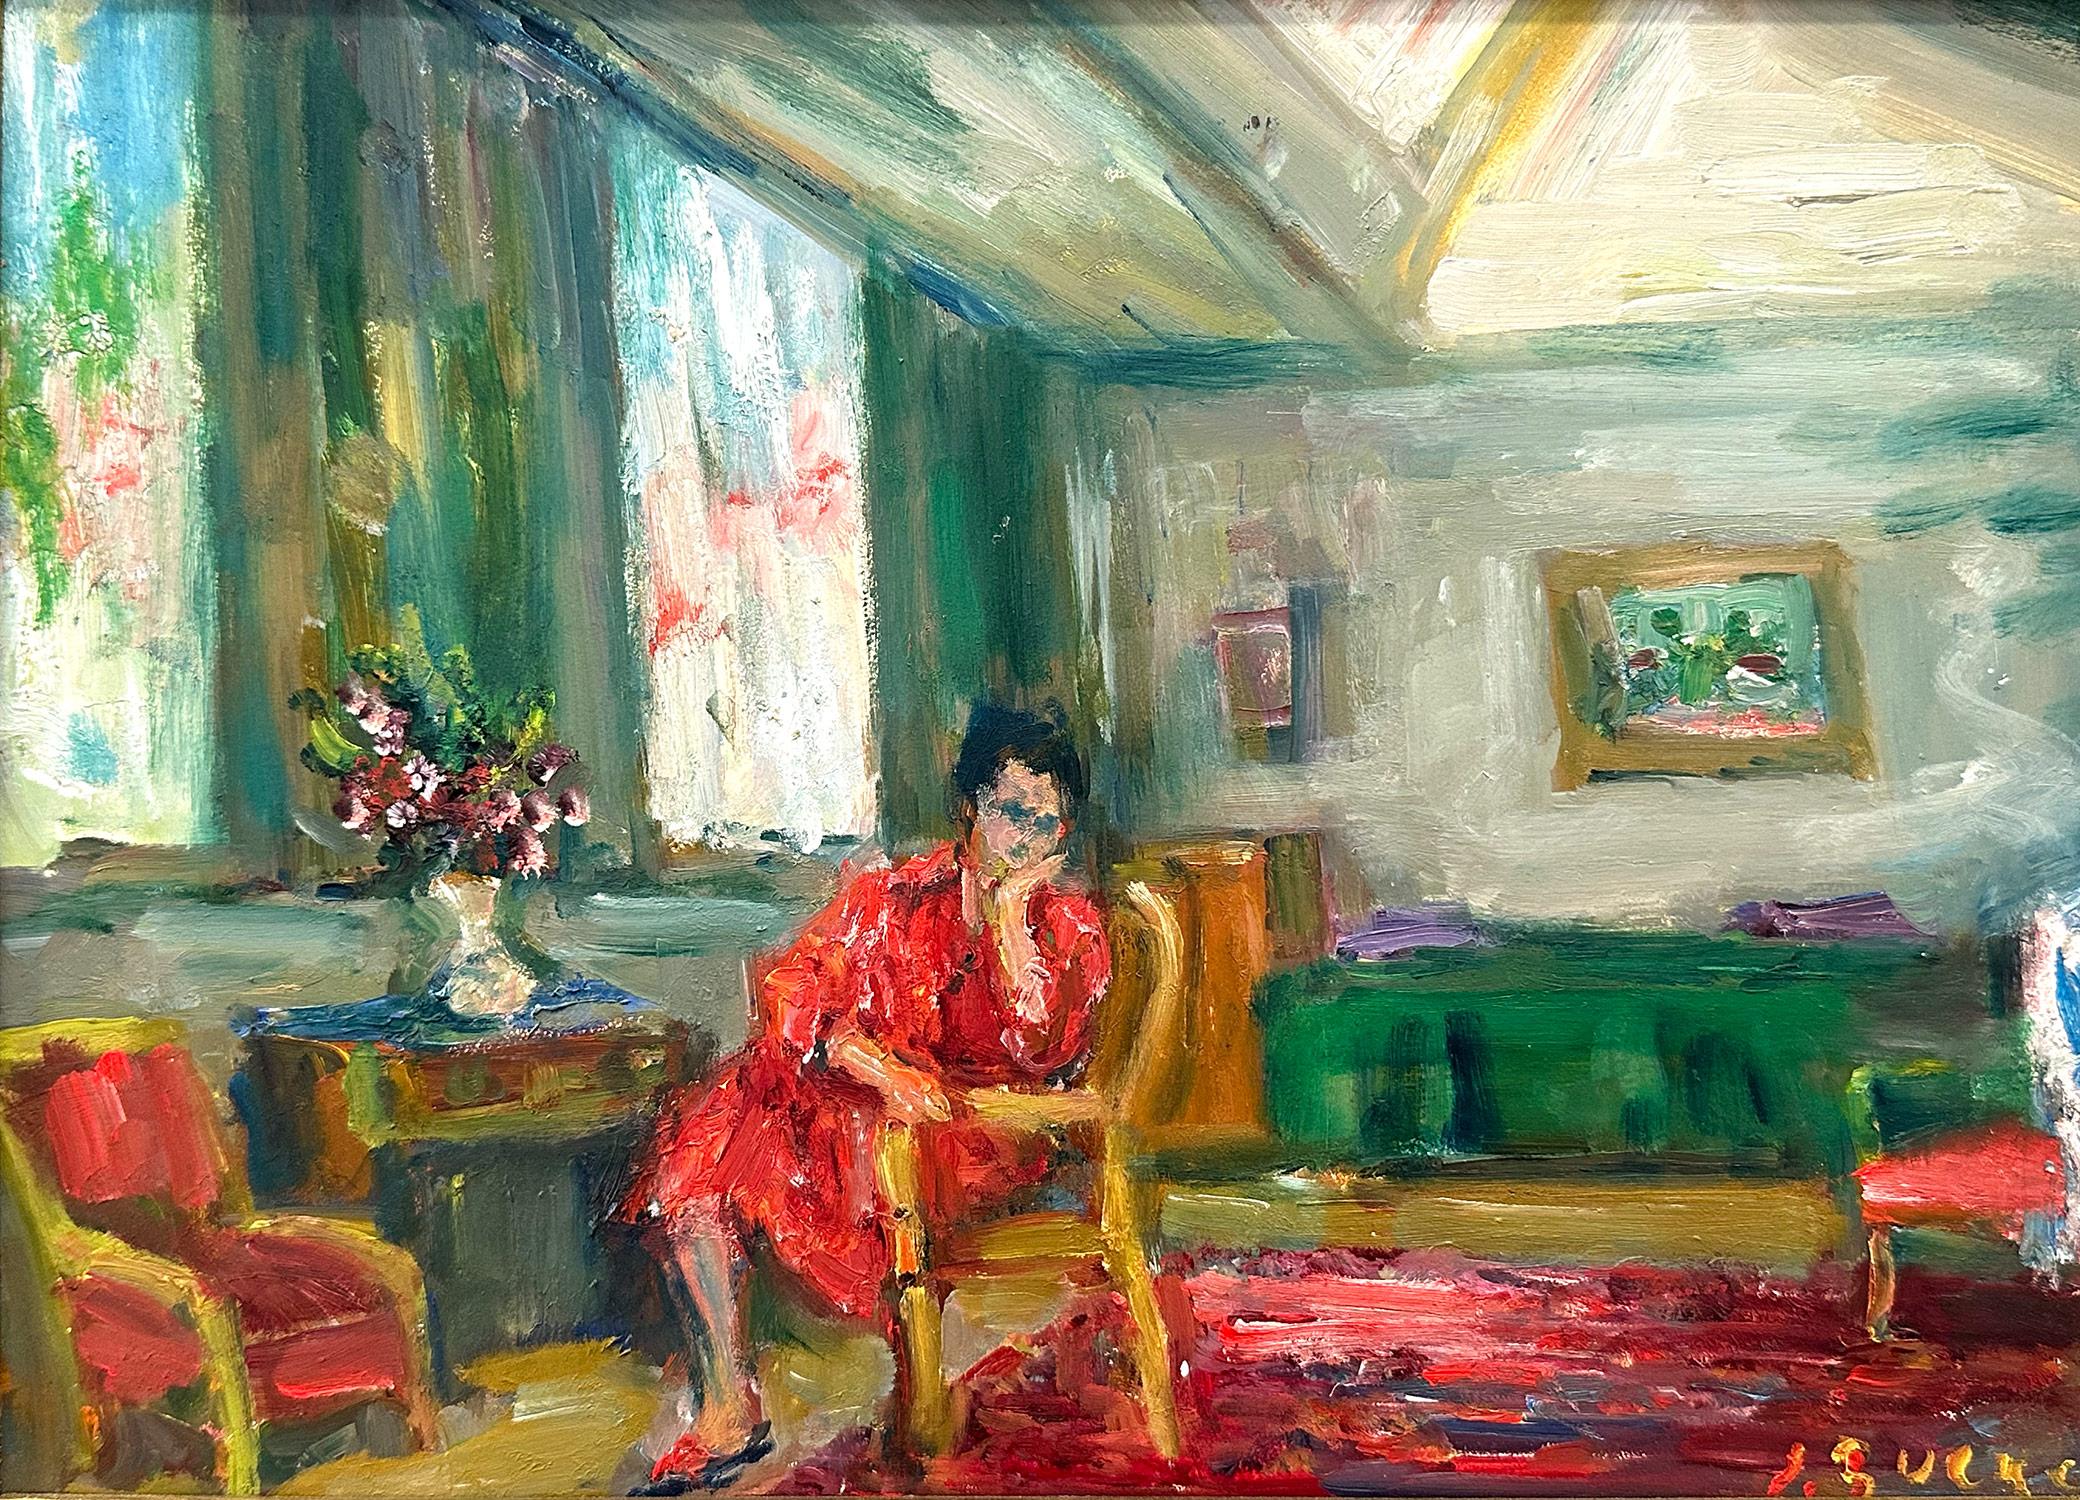 An intimate interior scene of a woman reclining in her living room with a bouquet of flowers on a sunny afternoon. We are charmed by the rich choice of color and intimate details throughout this miniature work. This painting depicts a woman in a red